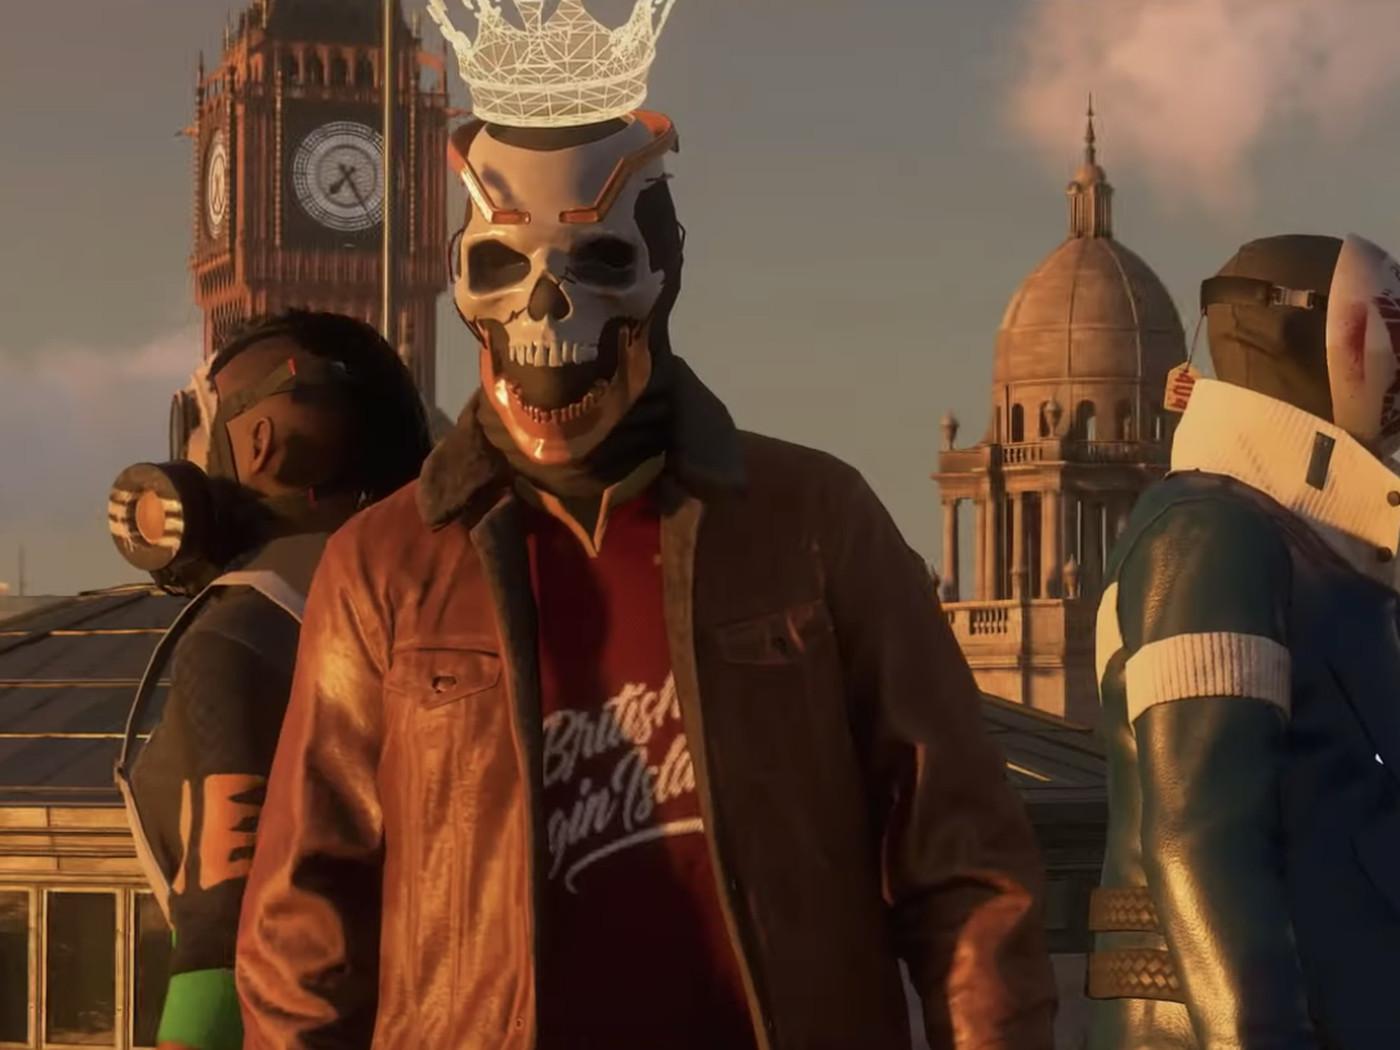 Watch Dogs Legion launches on March 6th, 2020